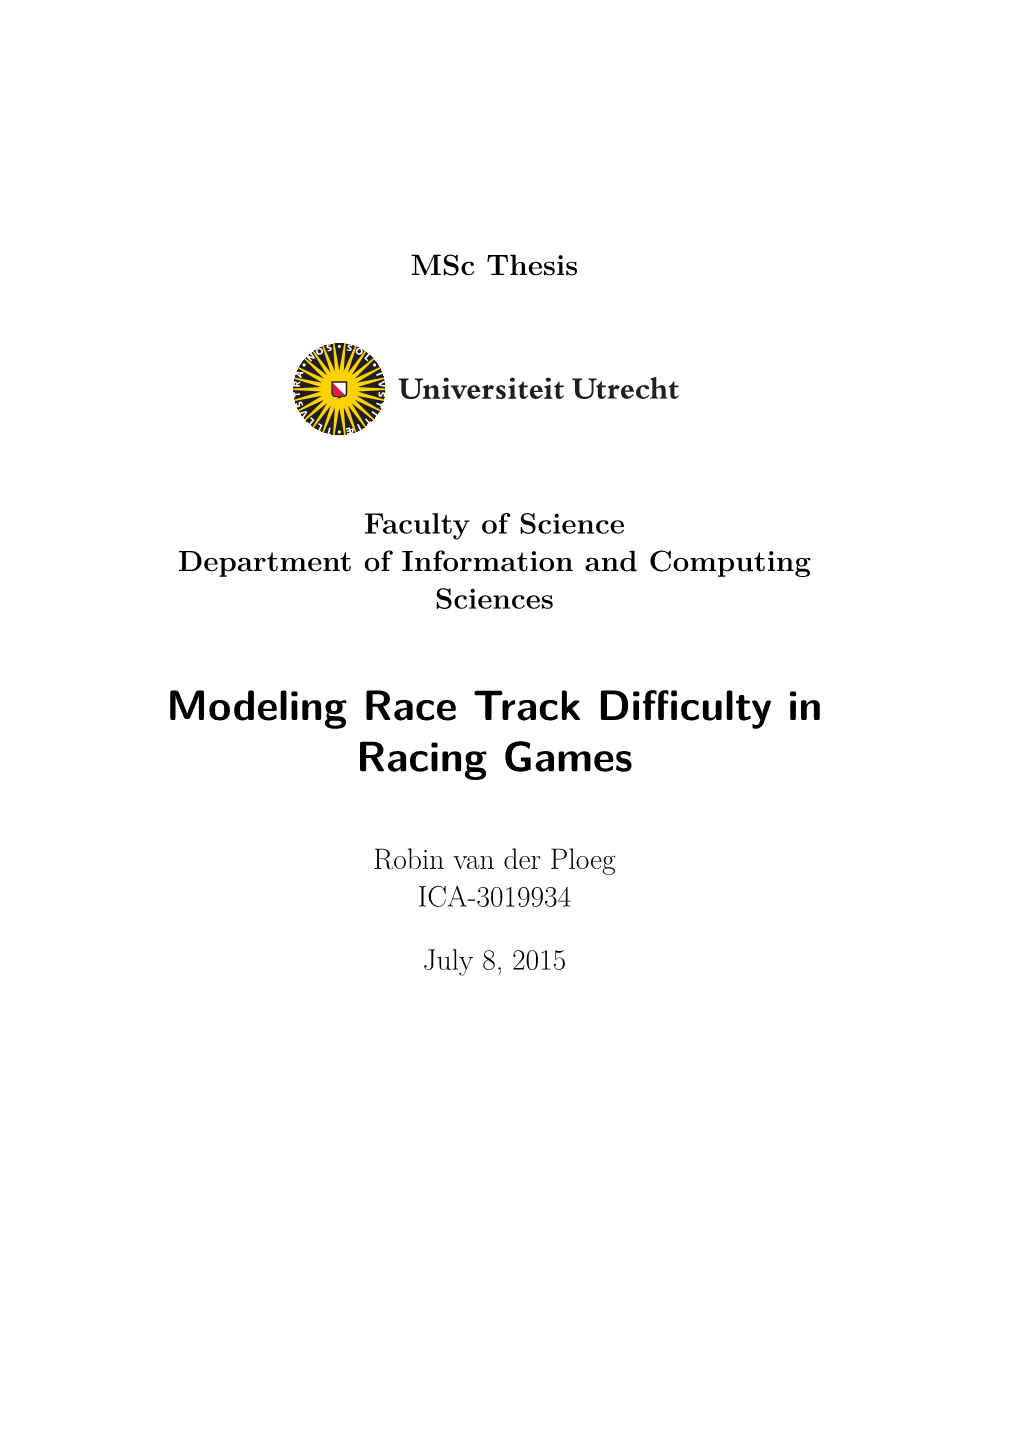 Modeling Race Track Difficulty in Racing Games